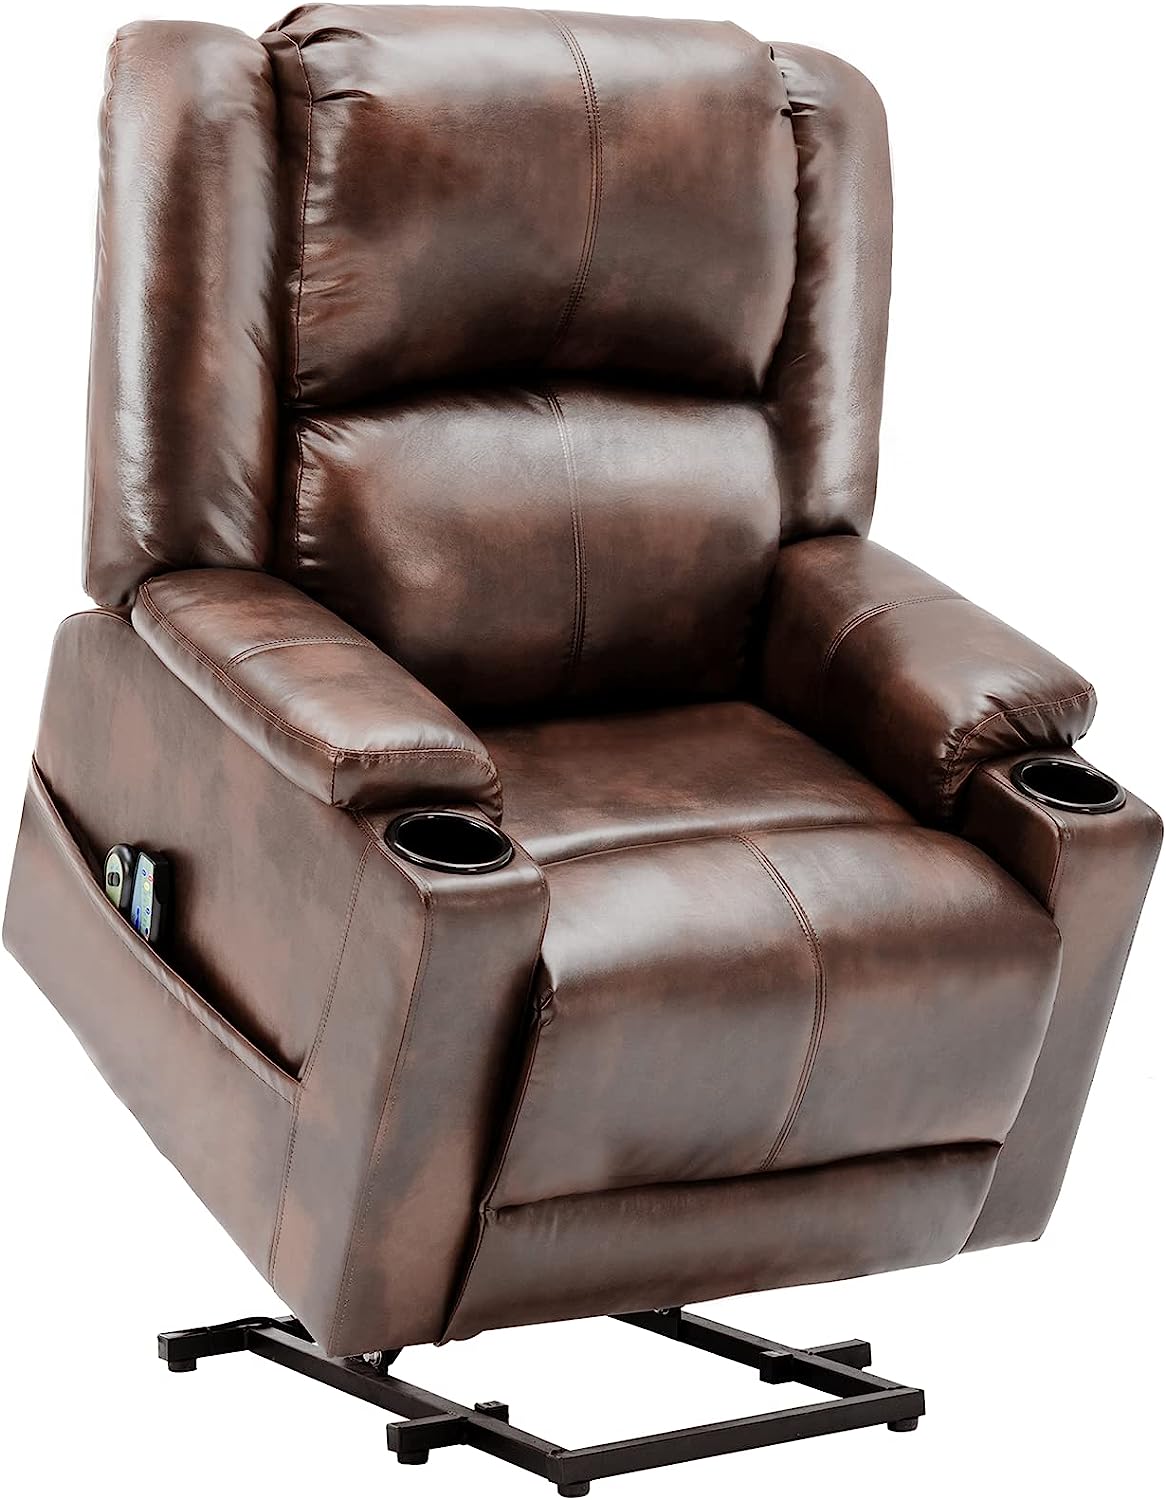 COMHOMA Power Lift Recliner Chairs for Elderly Big [...]